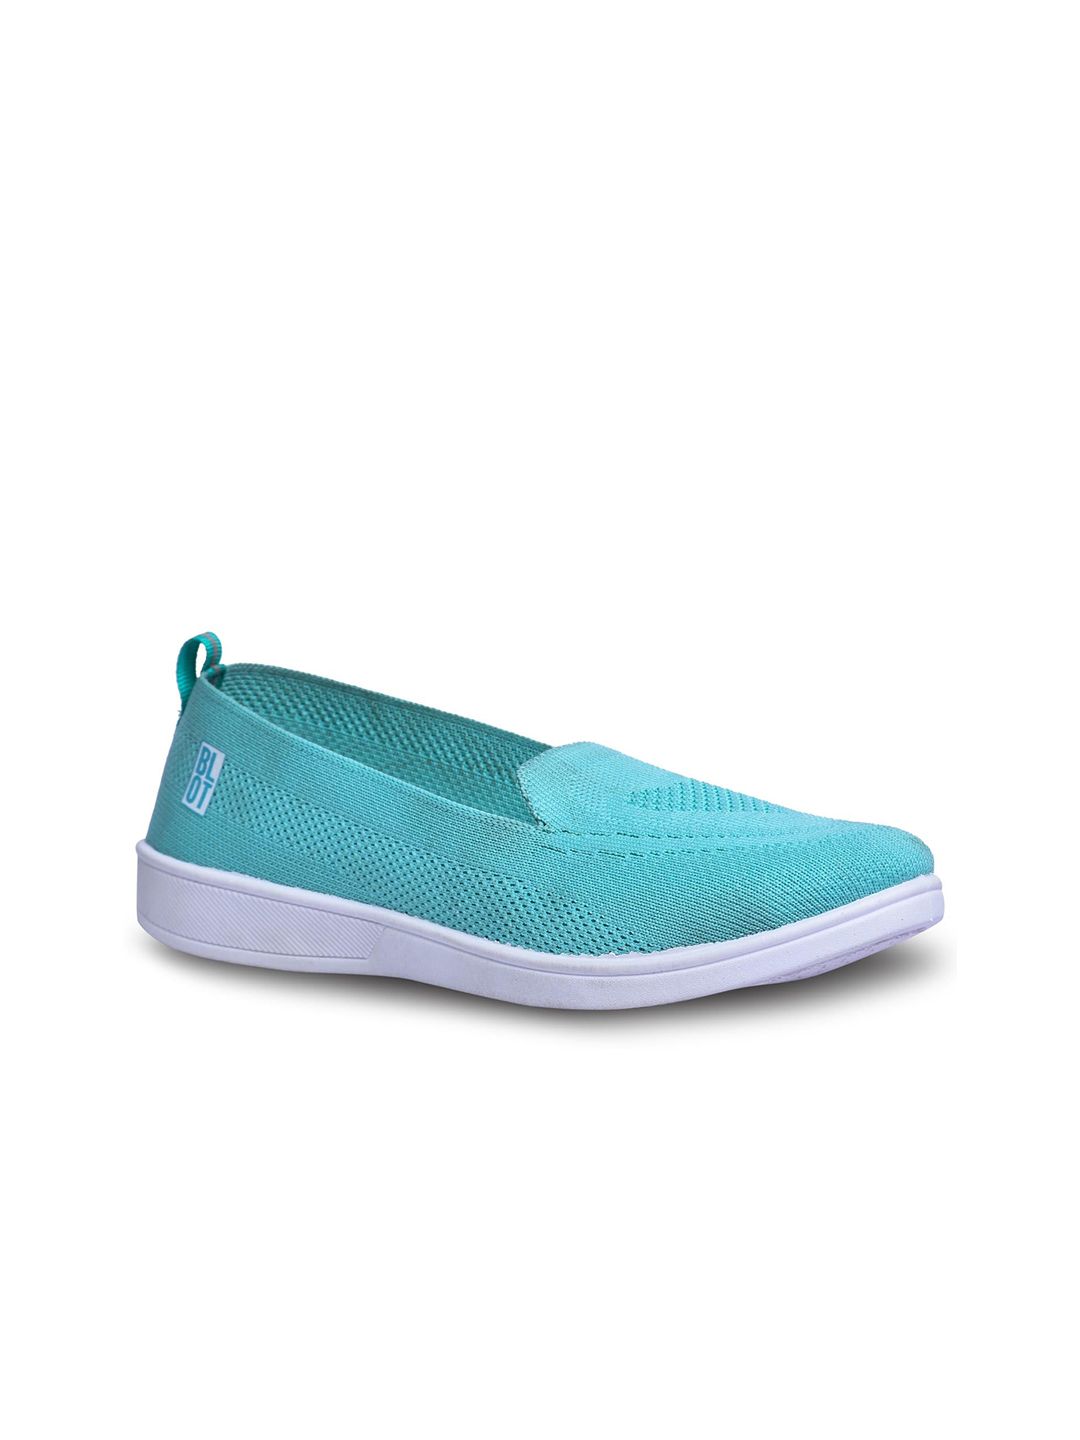 Paragon Women Comfort Insole Contrast Sole Mesh Slip On Sneakers Price in India